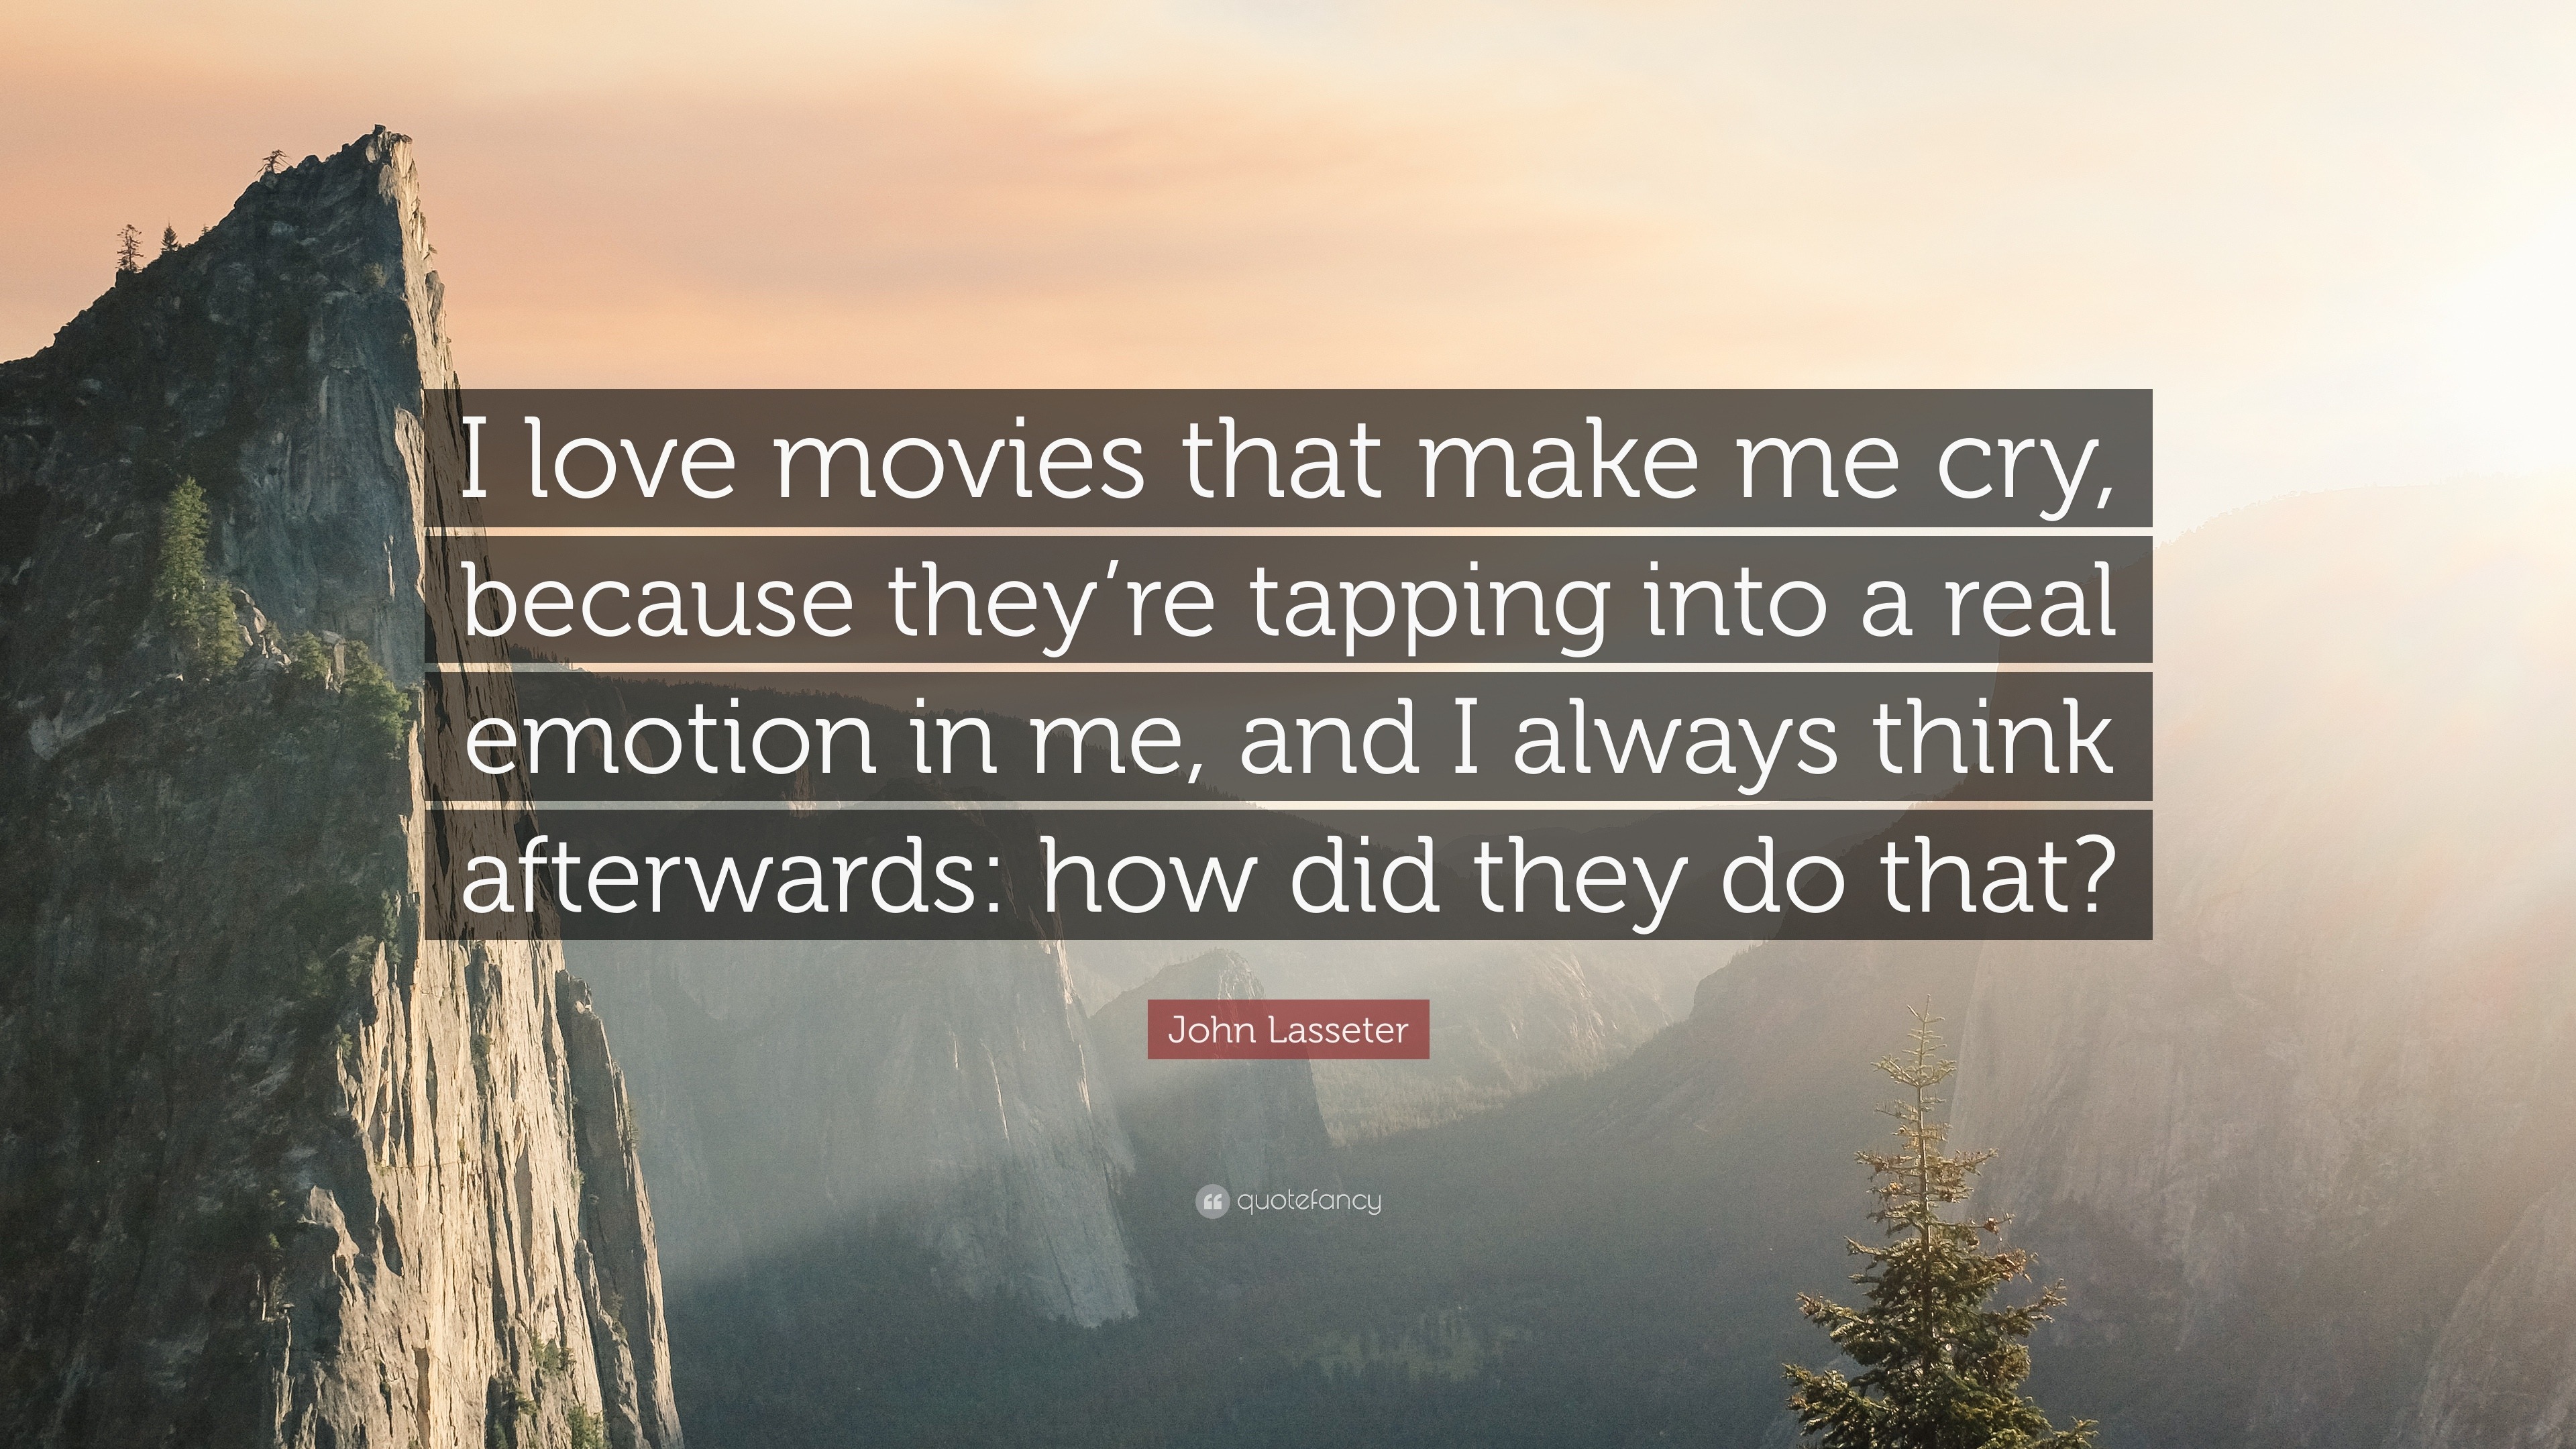 John Lasseter Quote “I love movies that make me cry because they